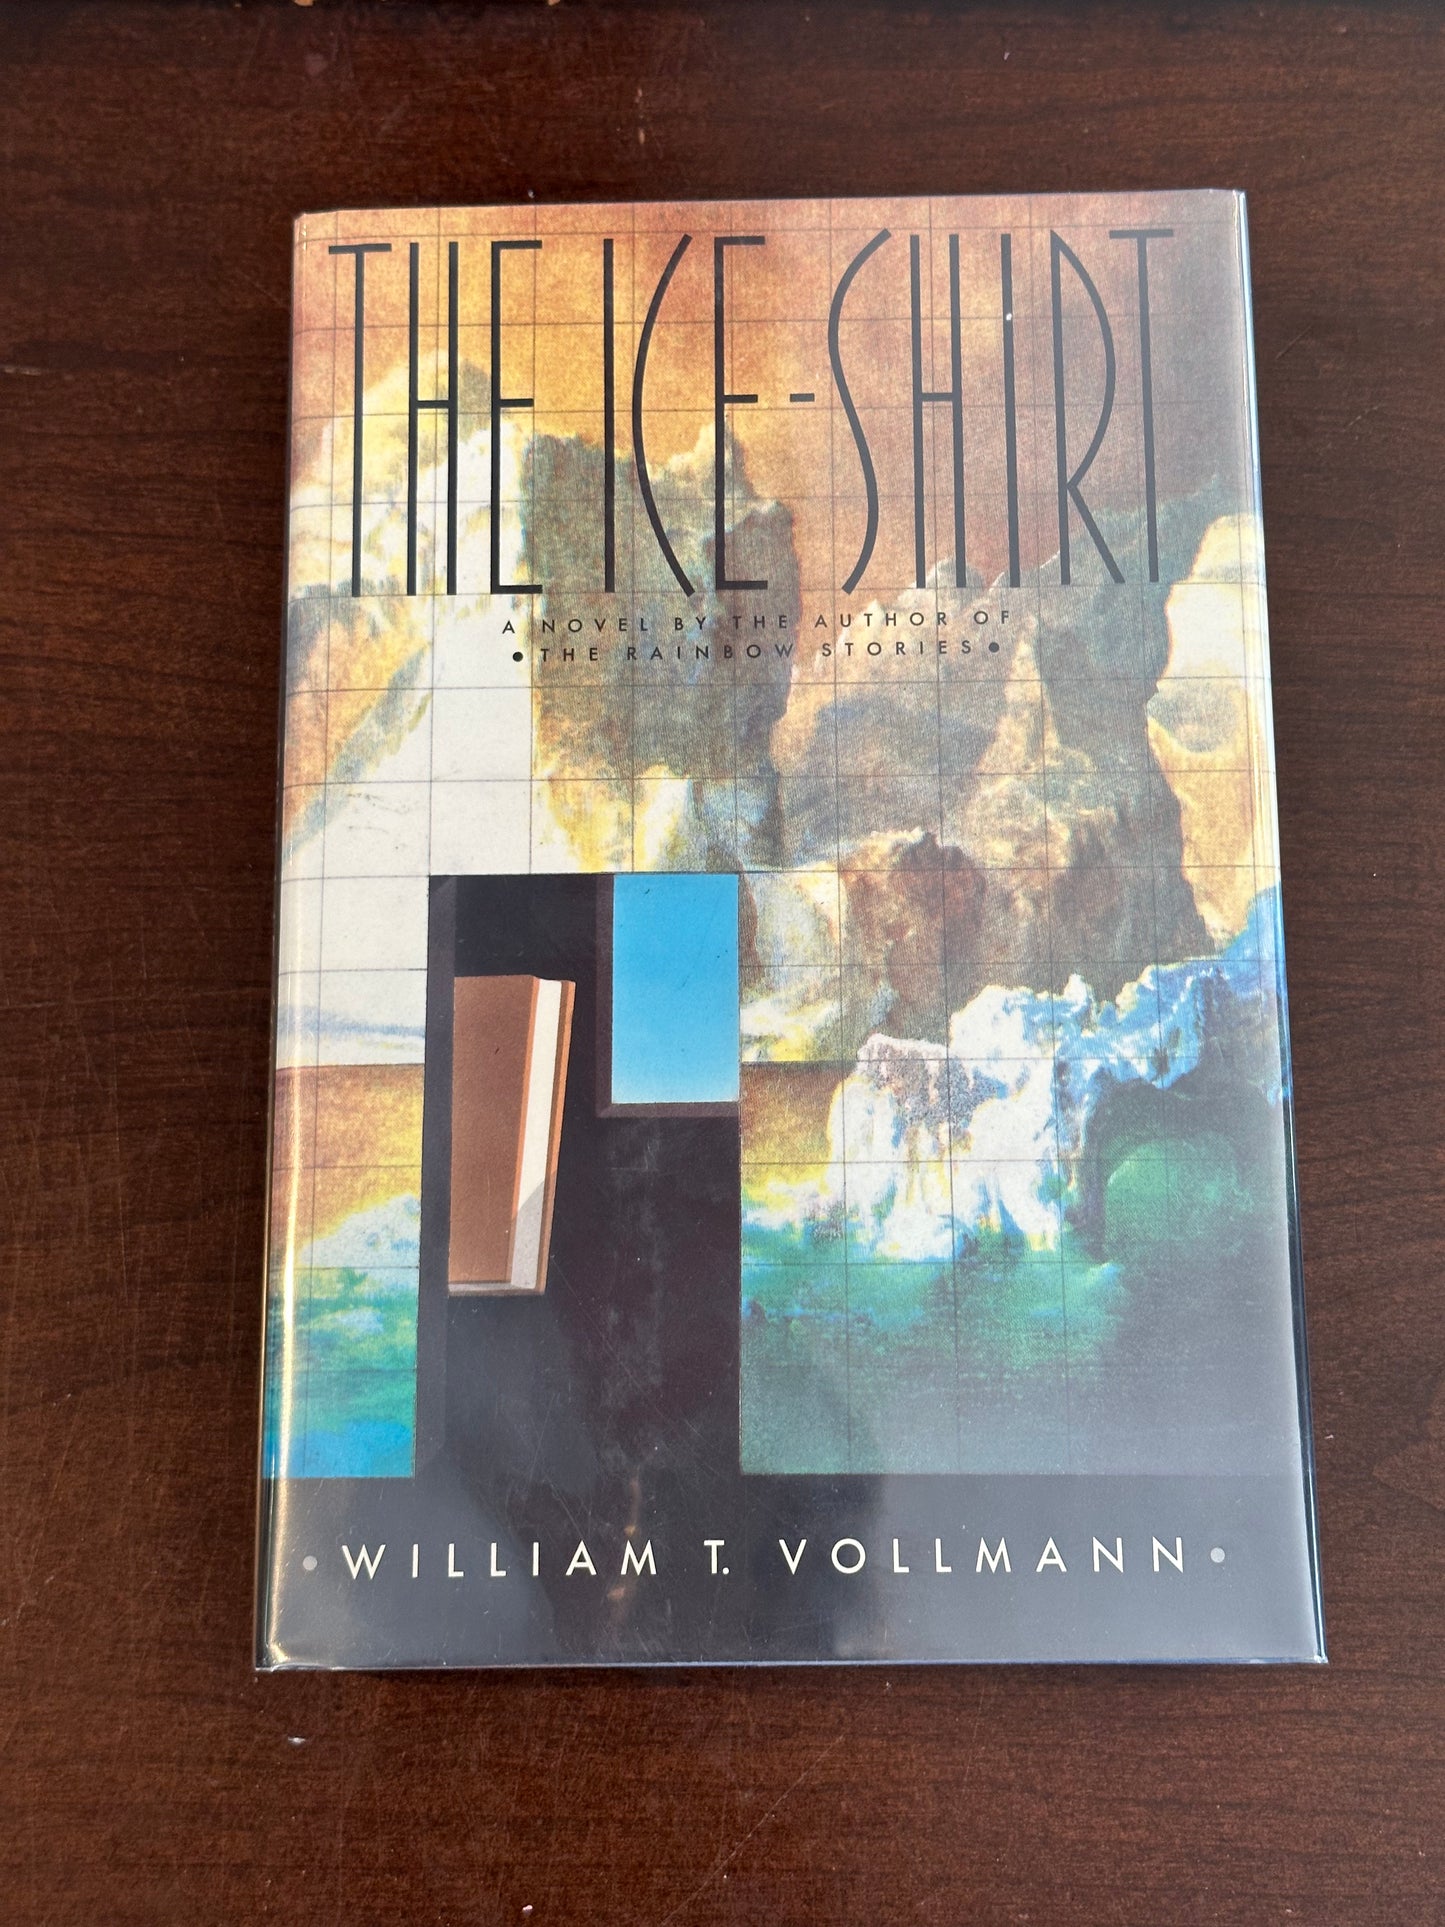 The Ice Shirt by William T. Vollmann (Signed)